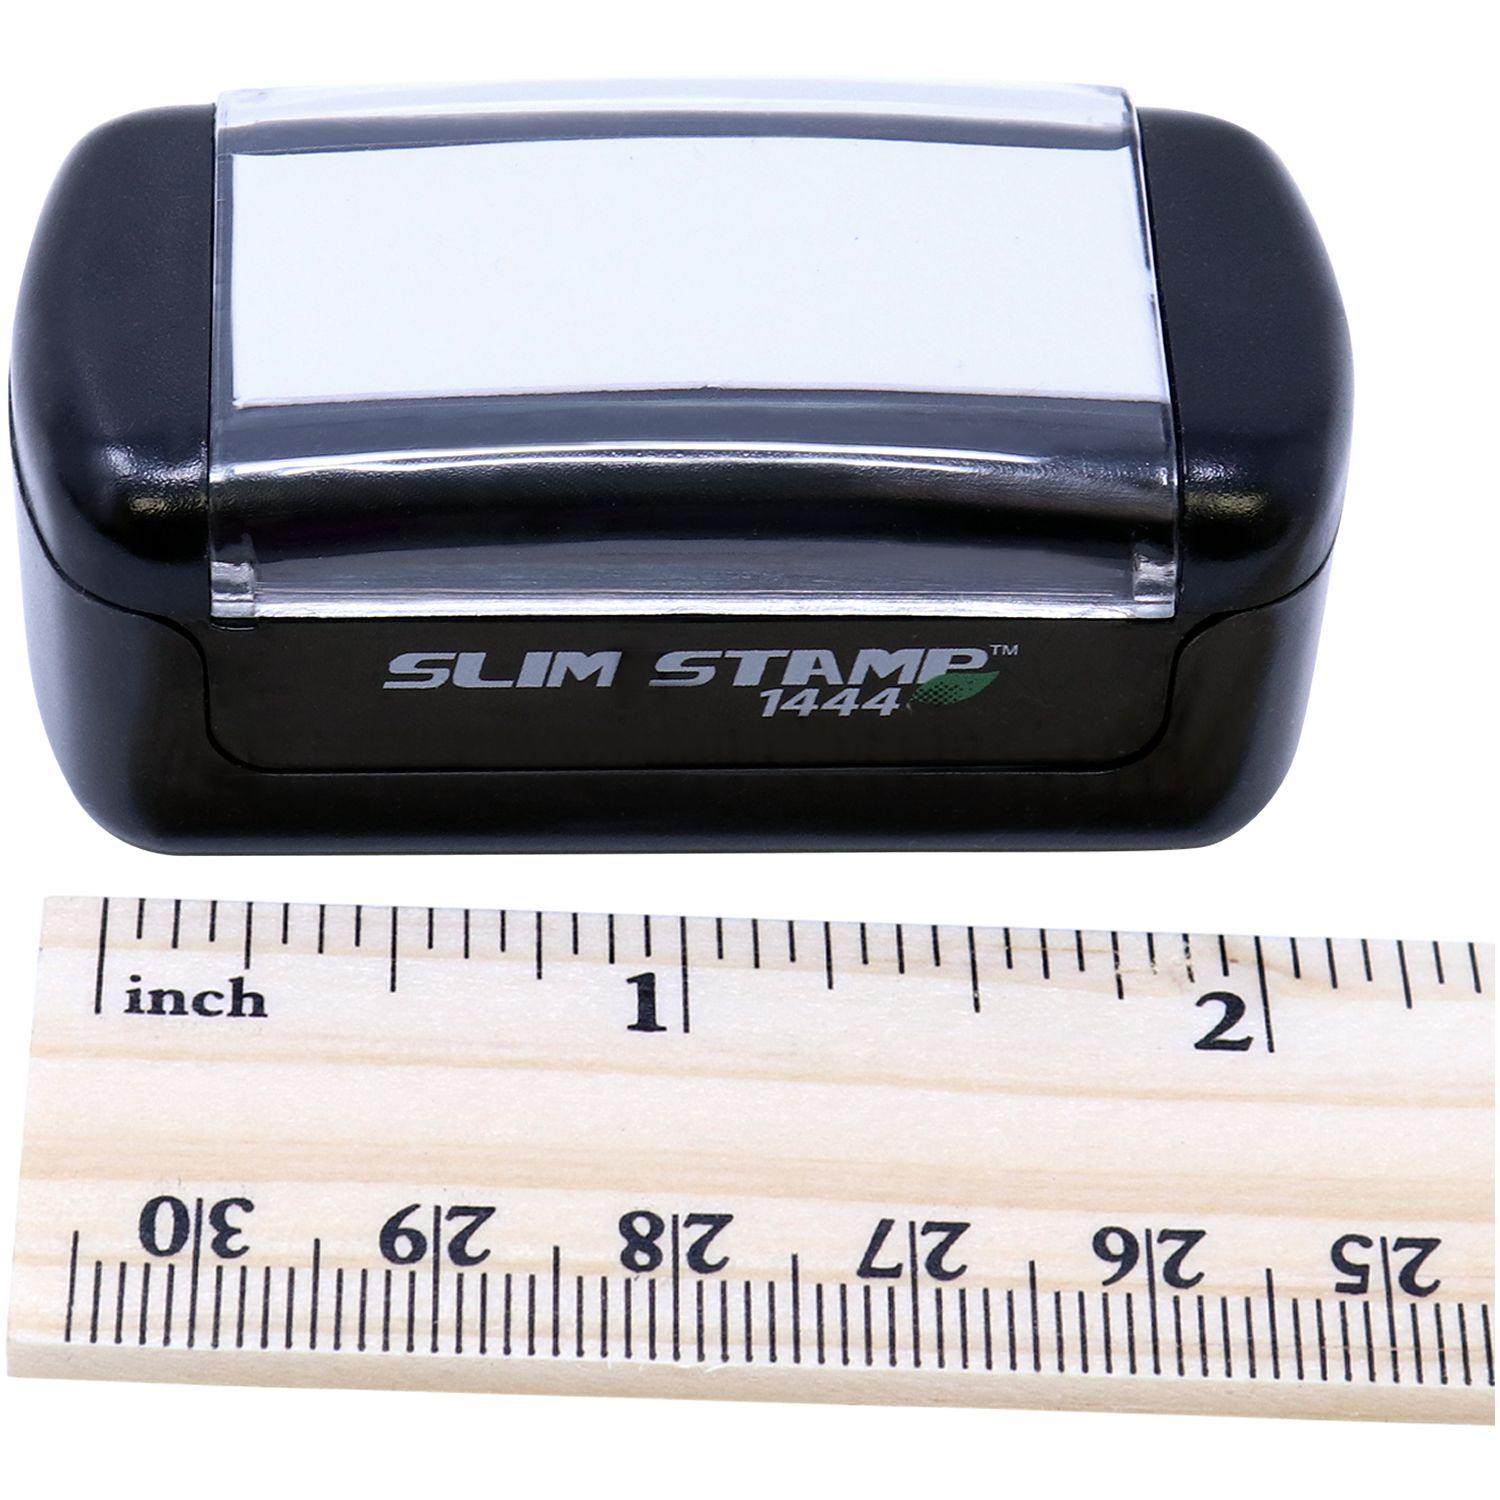 Measurement Slim Pre-Inked First Class Mail International Stamp with Ruler